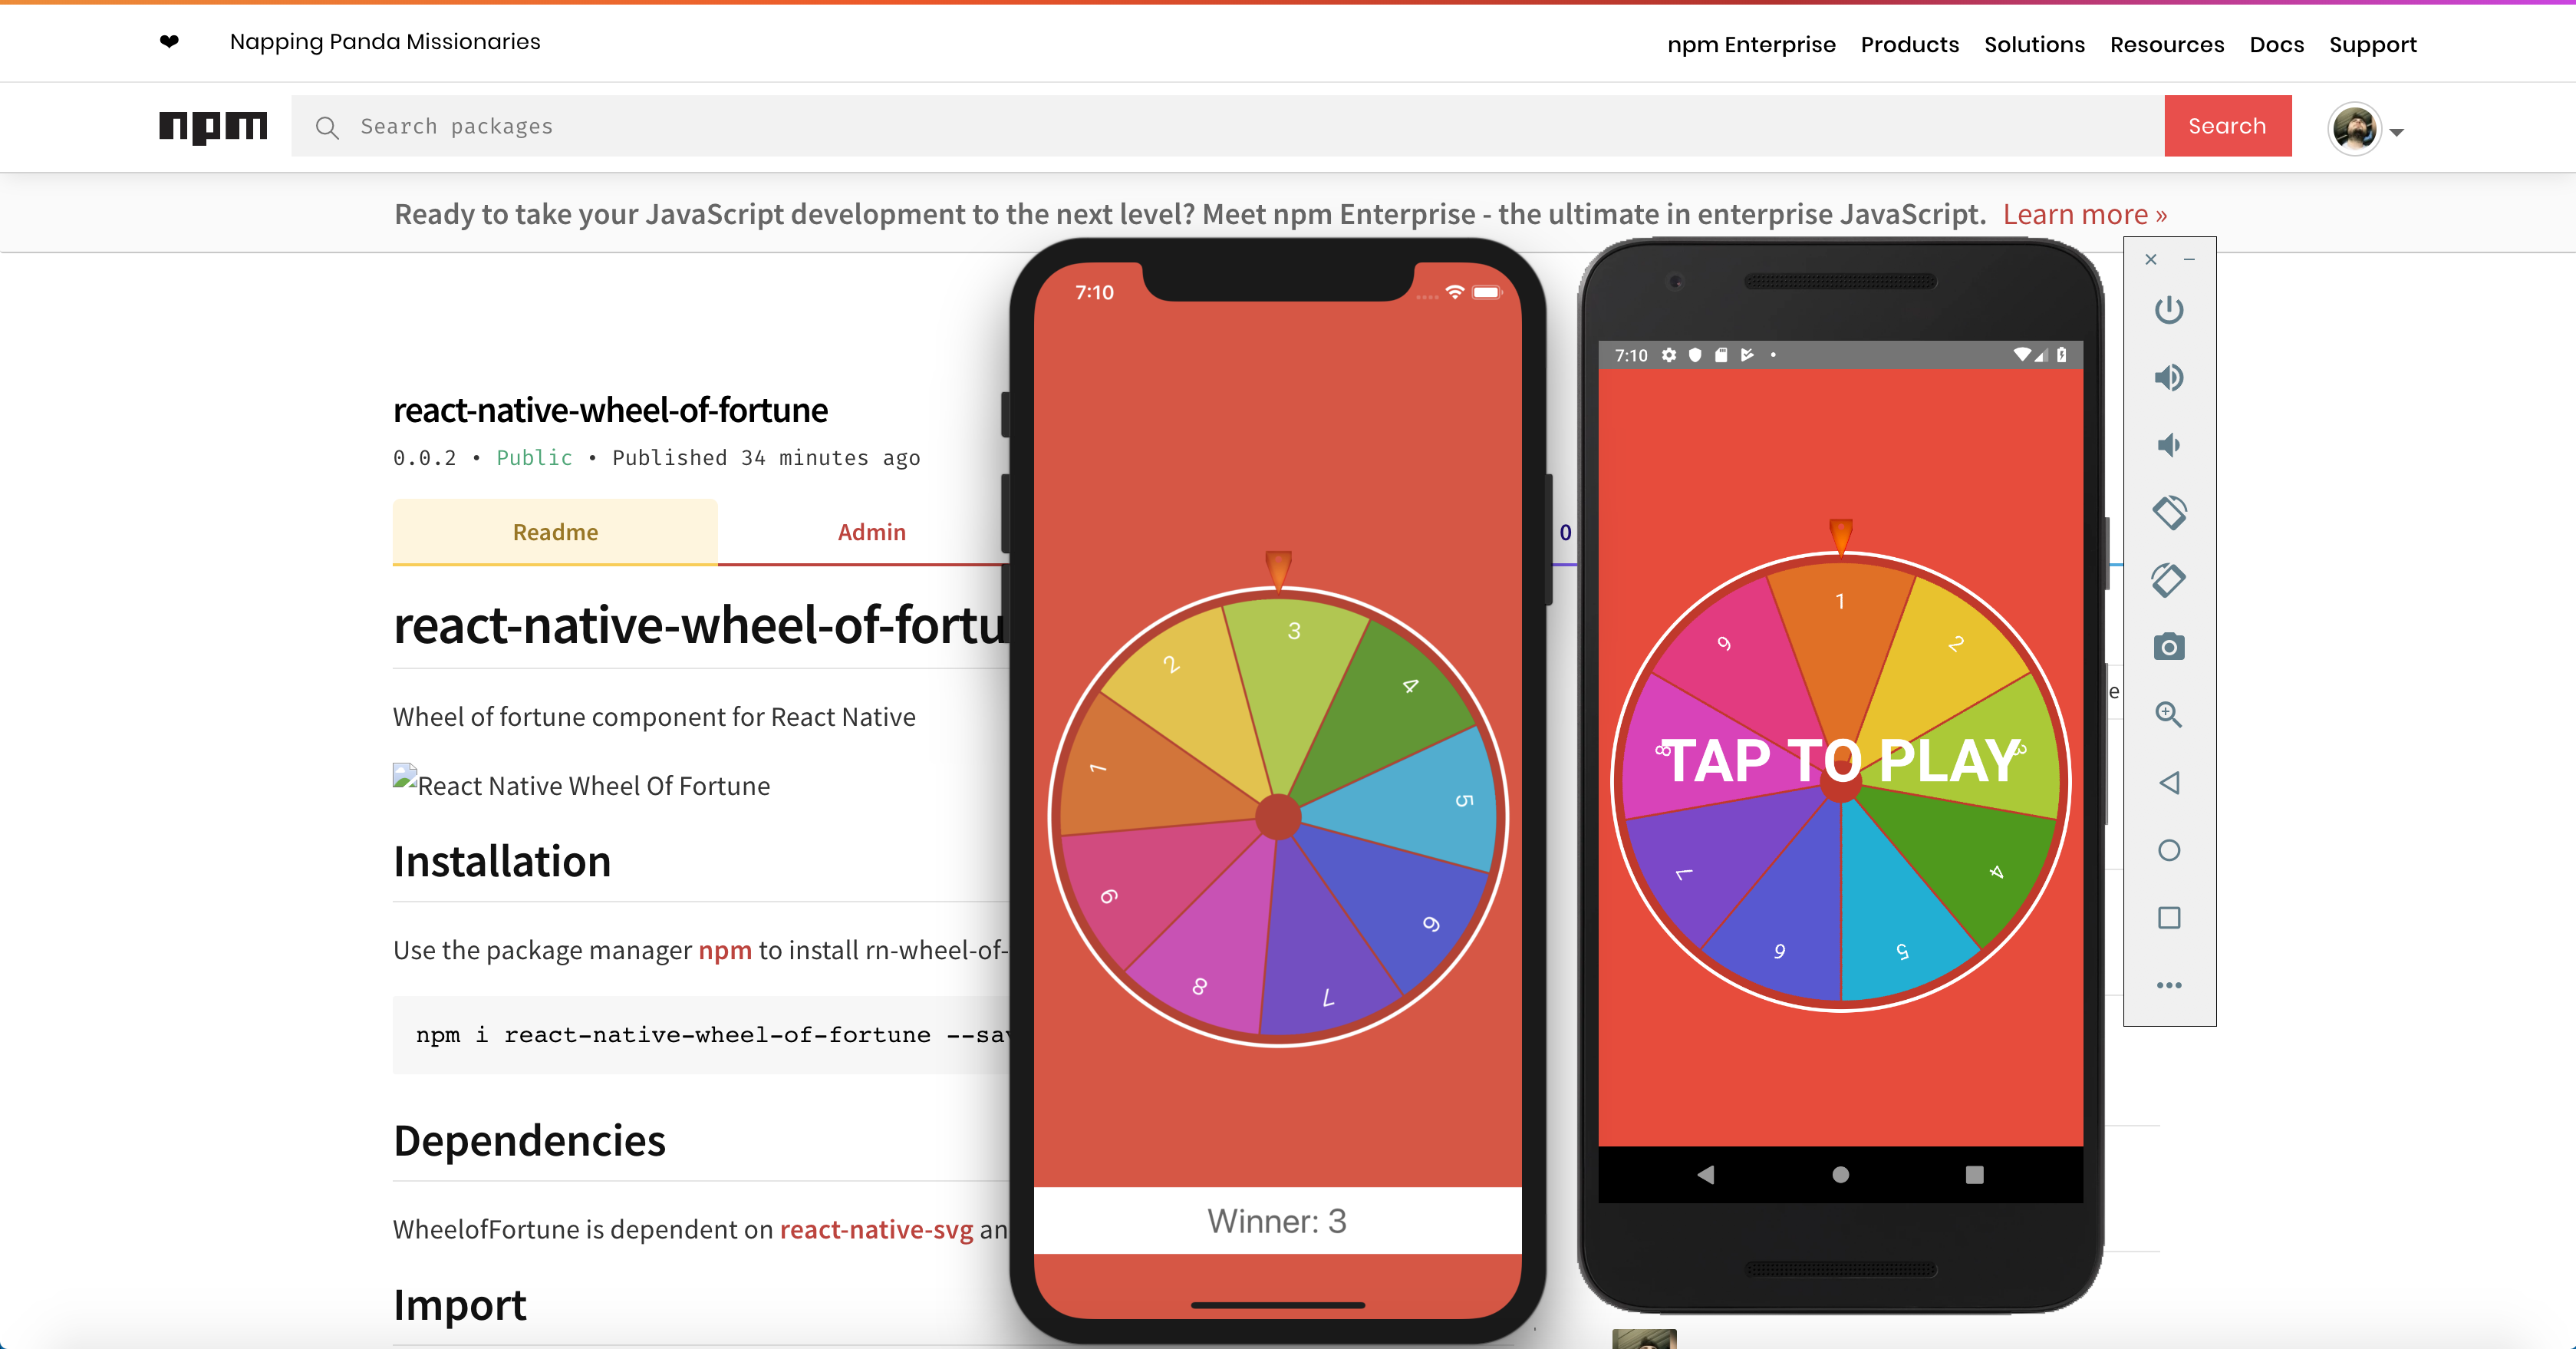 Wheel Of Fortune Component For React Native